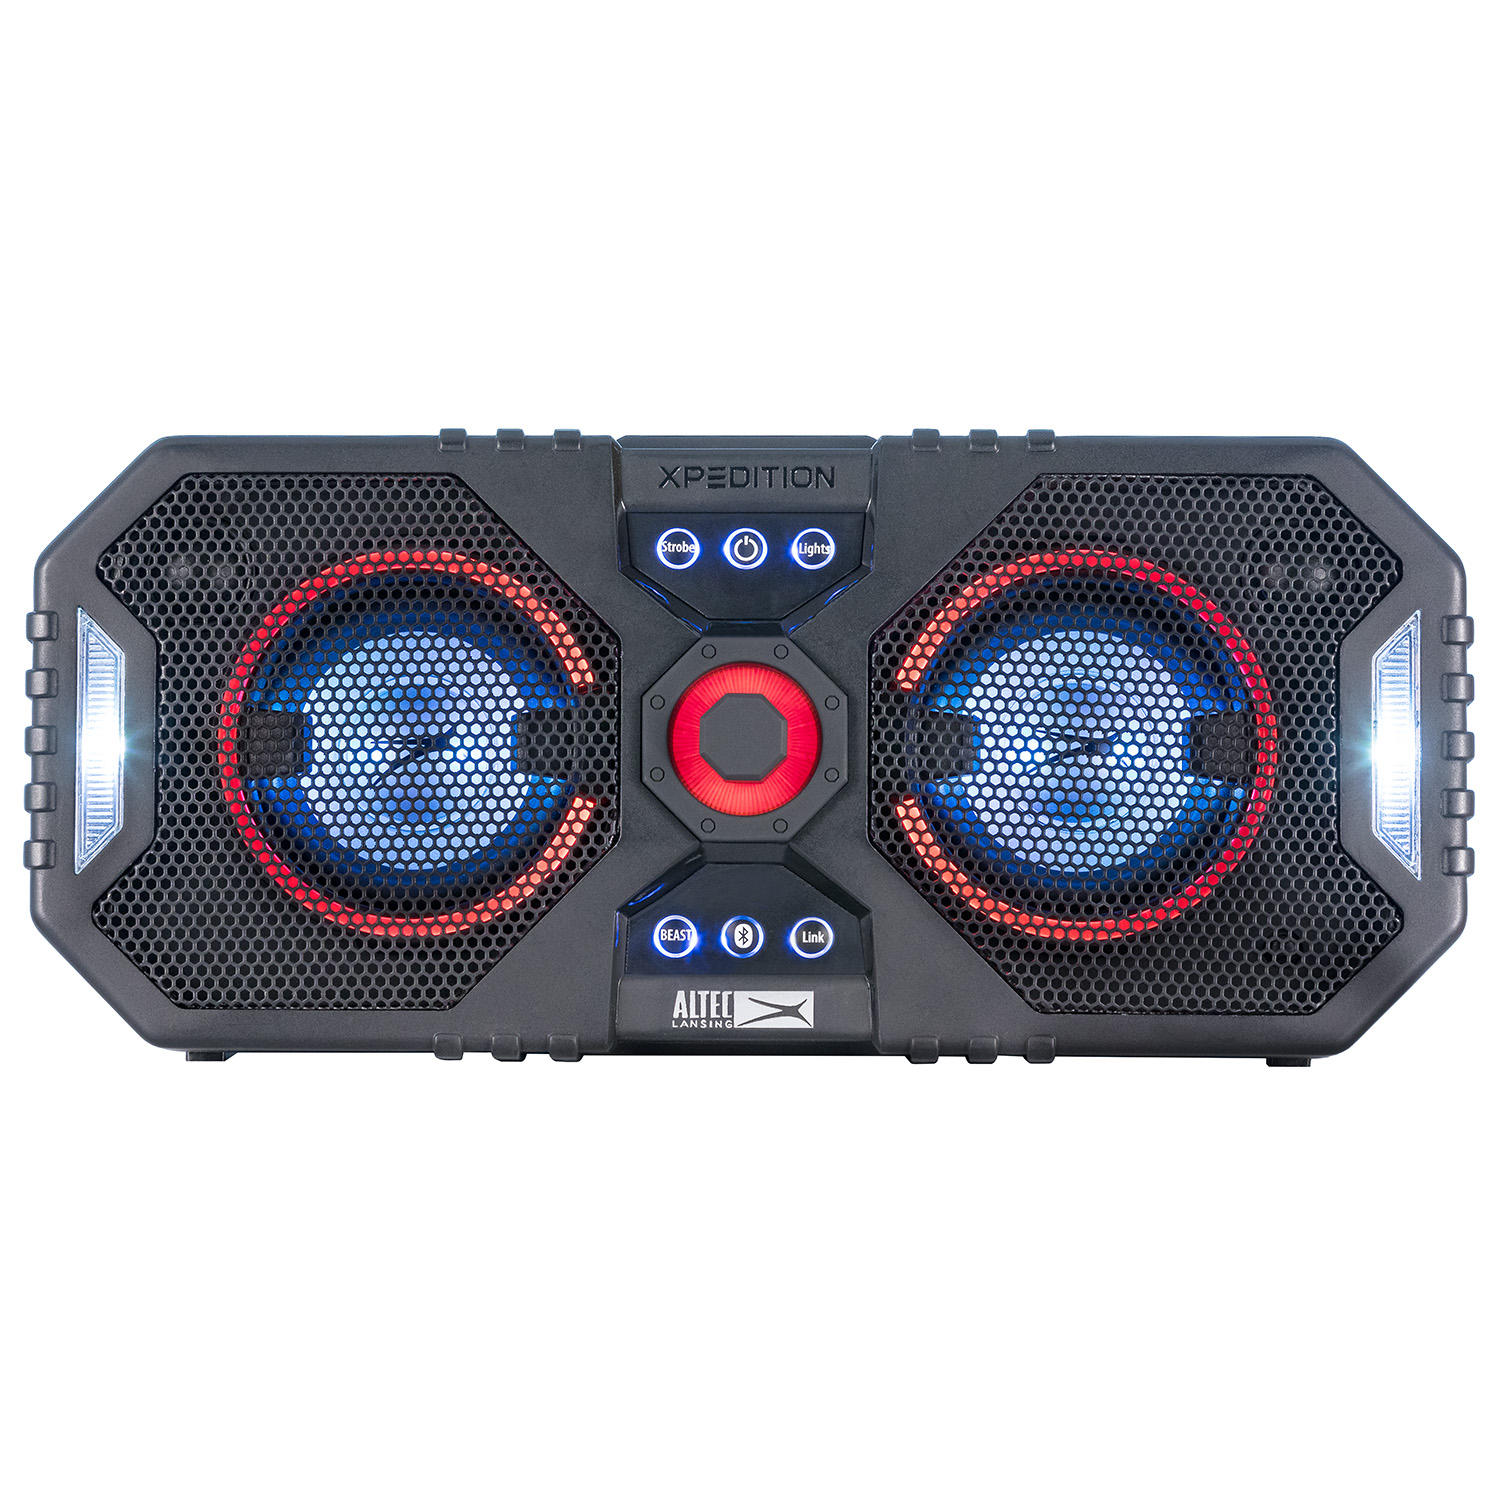 Altec Lansing Xpedition 4 Everything Proof Portable Waterproof Bluetooth Indoor/Outdoor Speaker